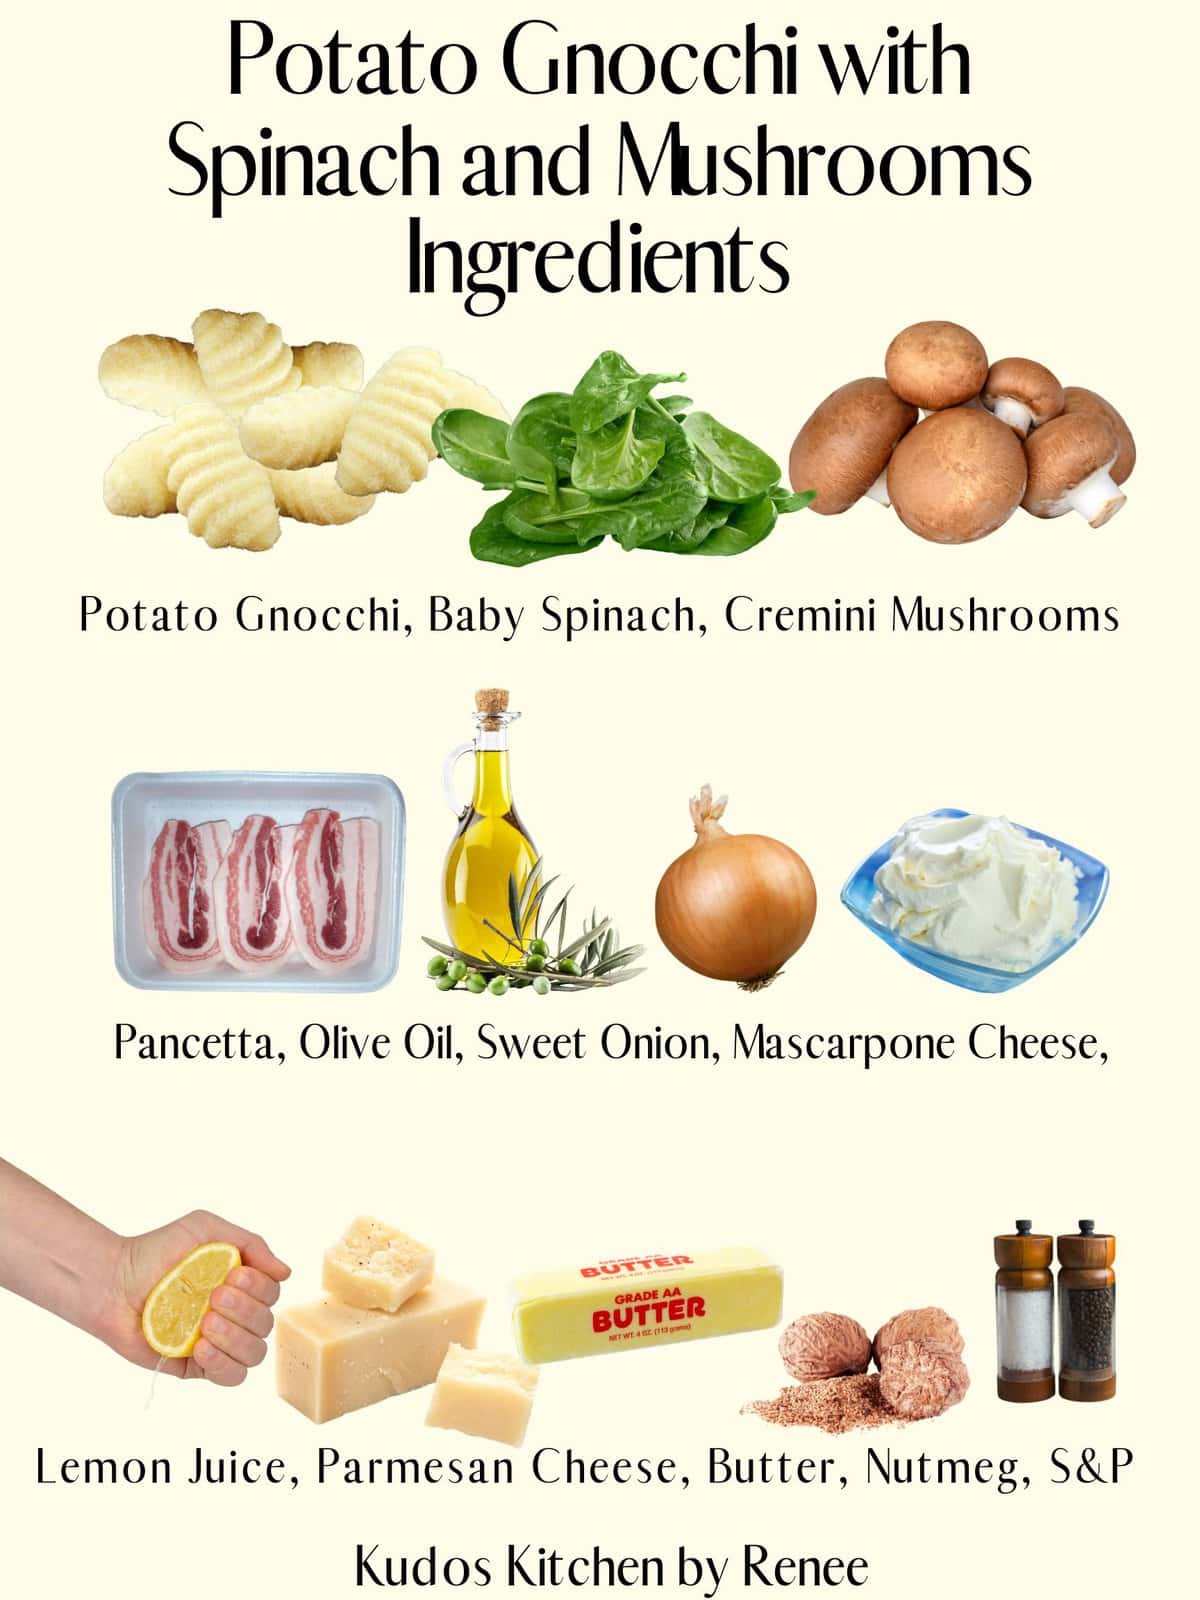 A visual ingredient list for making Potato Gnocchi with Spinach and Mushrooms.